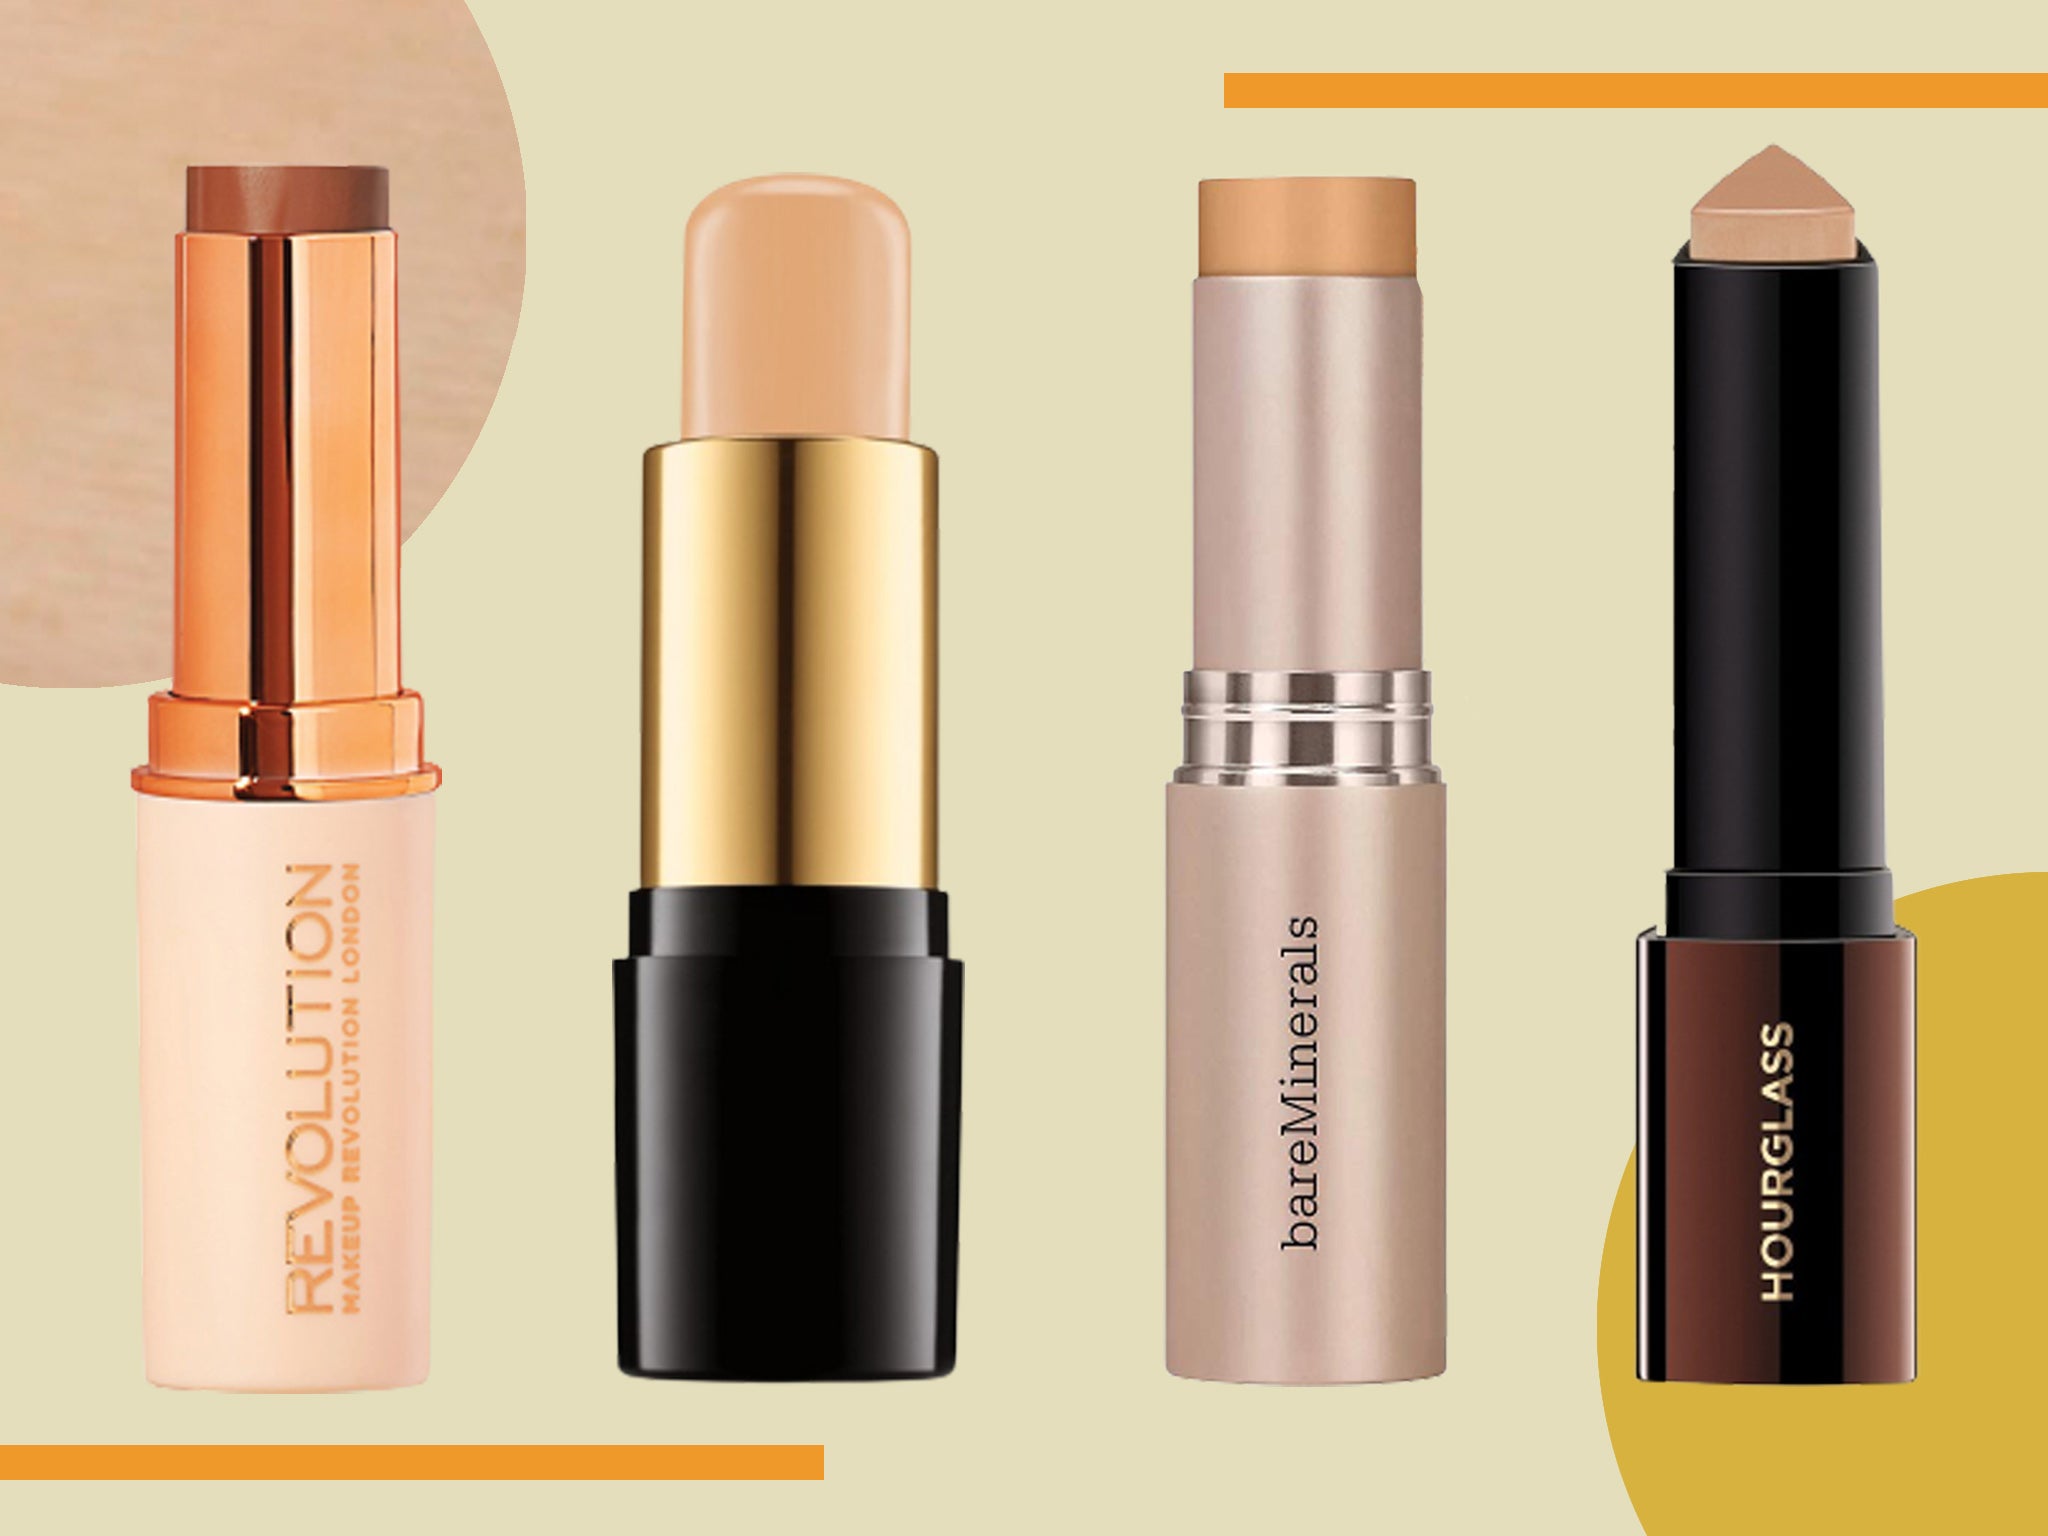 Best foundation stick 2021: Bobbi Brown, Hourglass, Huda Beauty and more